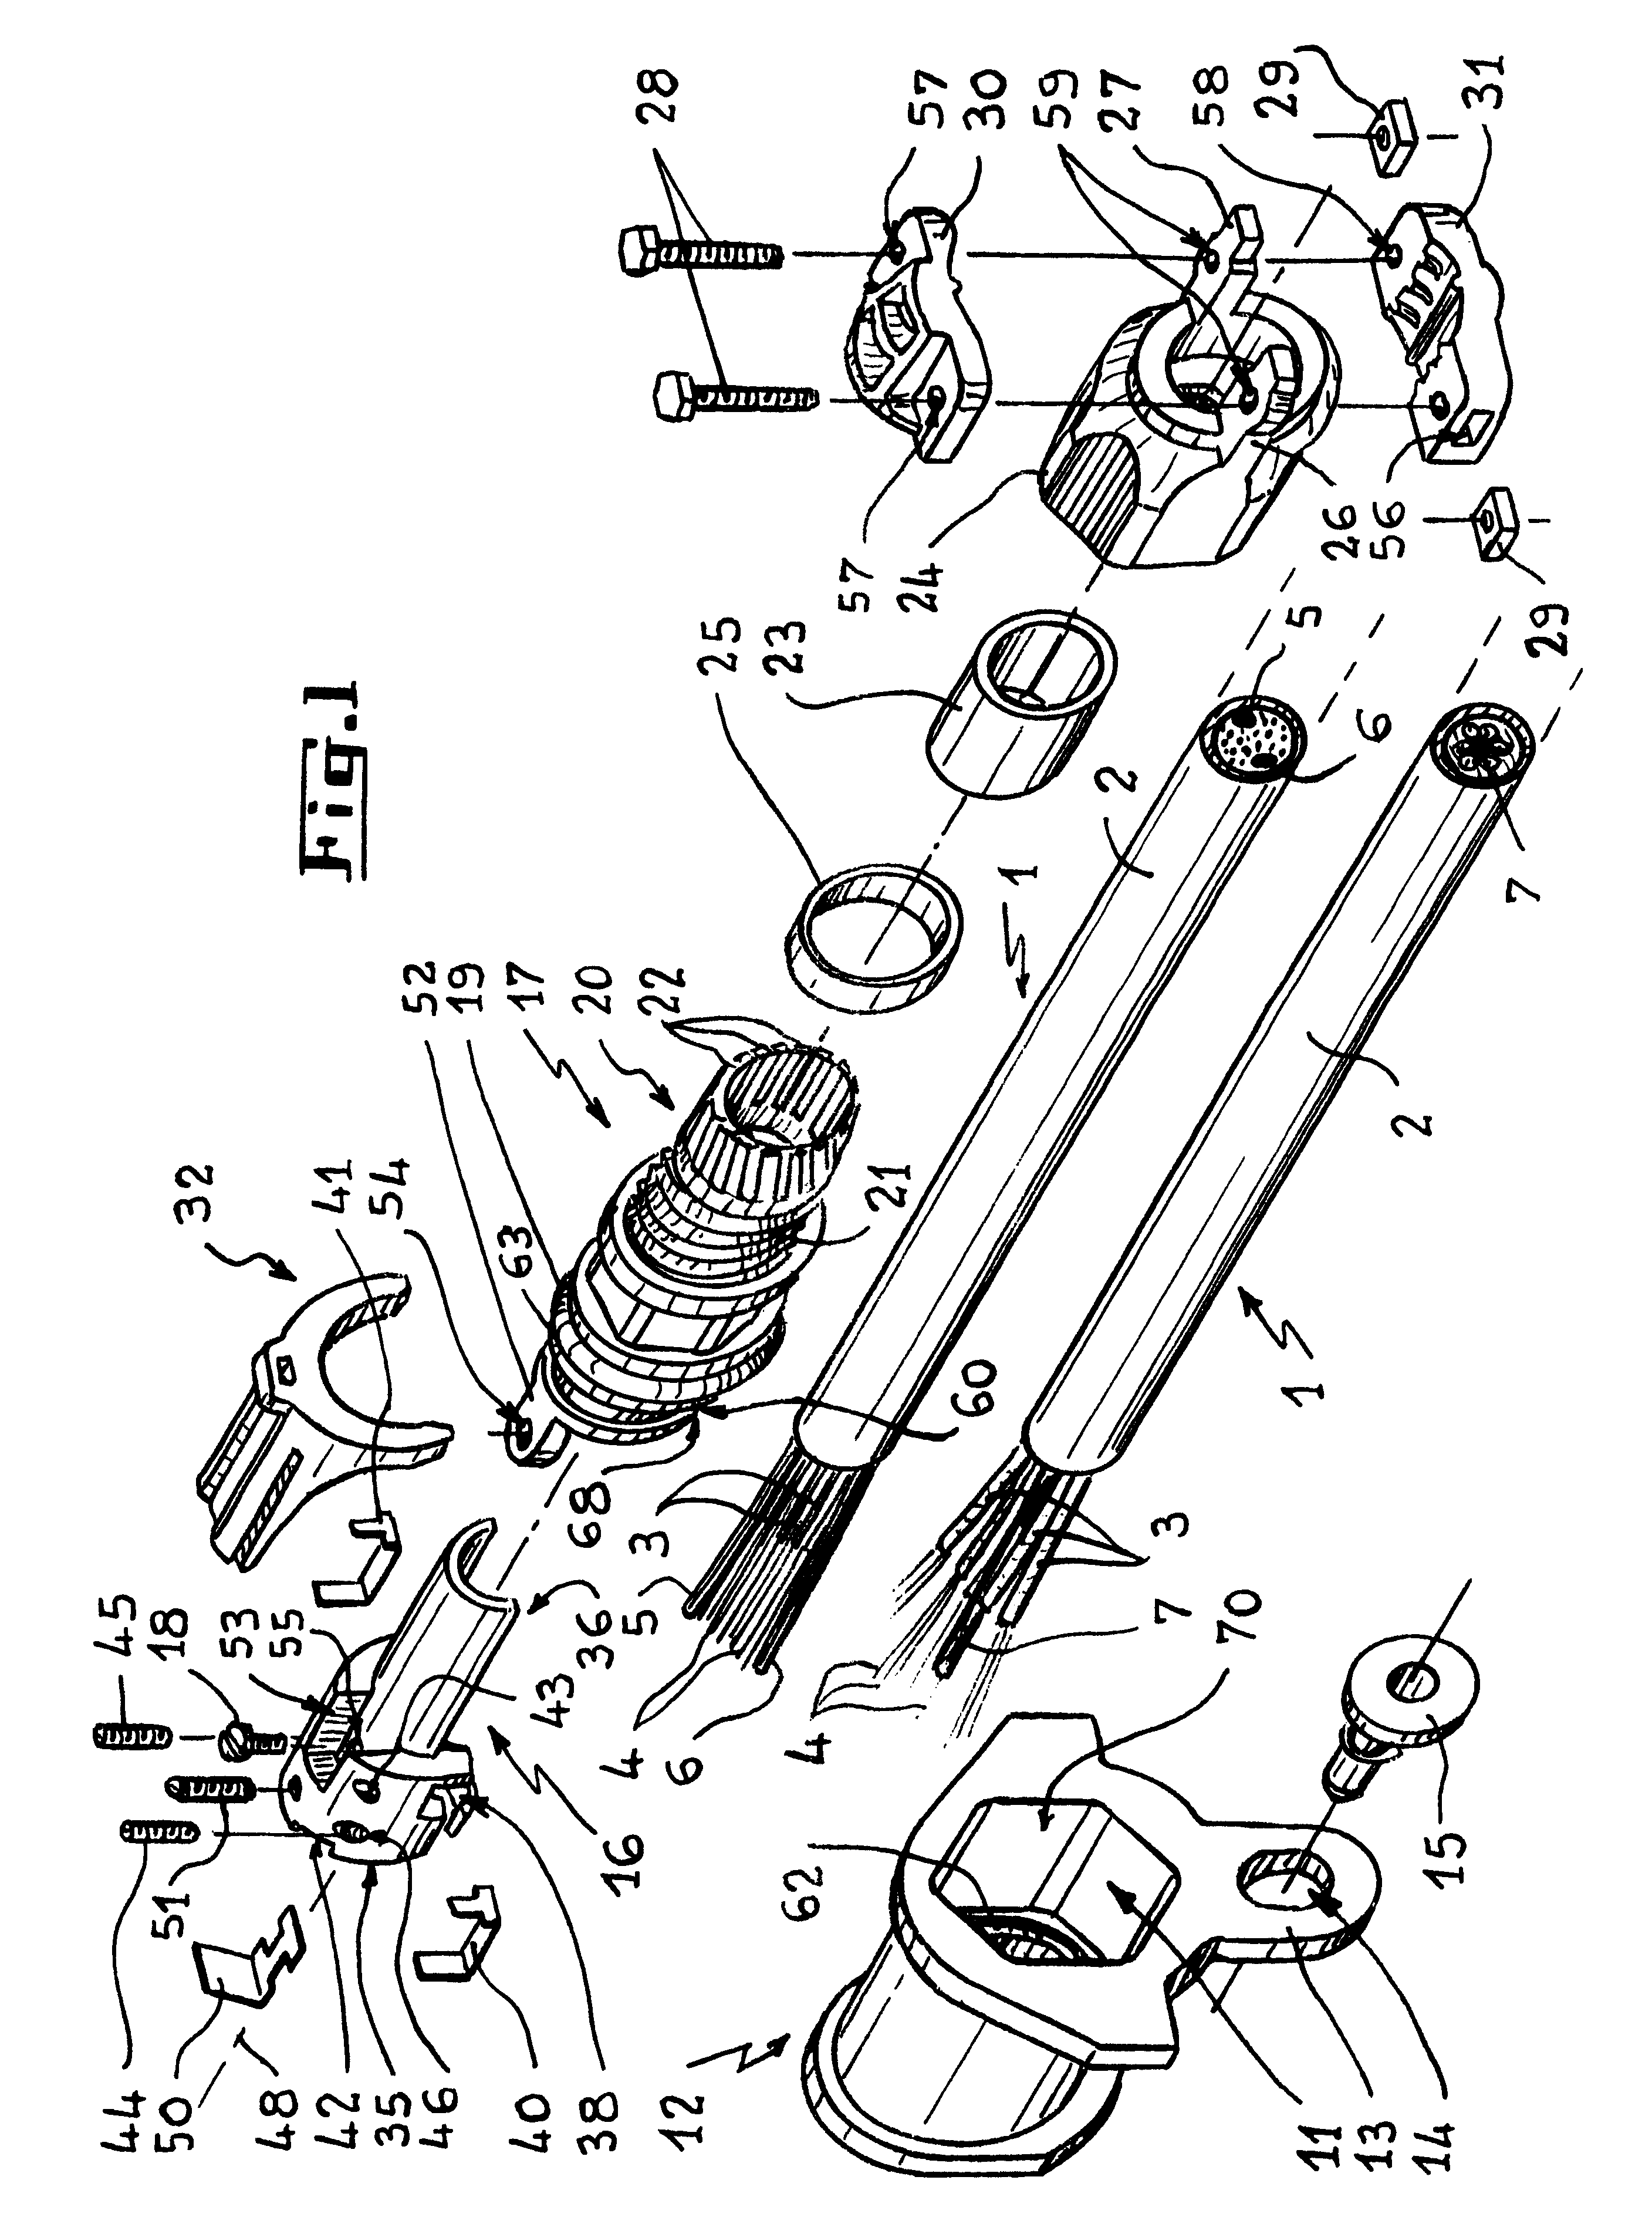 Optical fiber cable inlet device